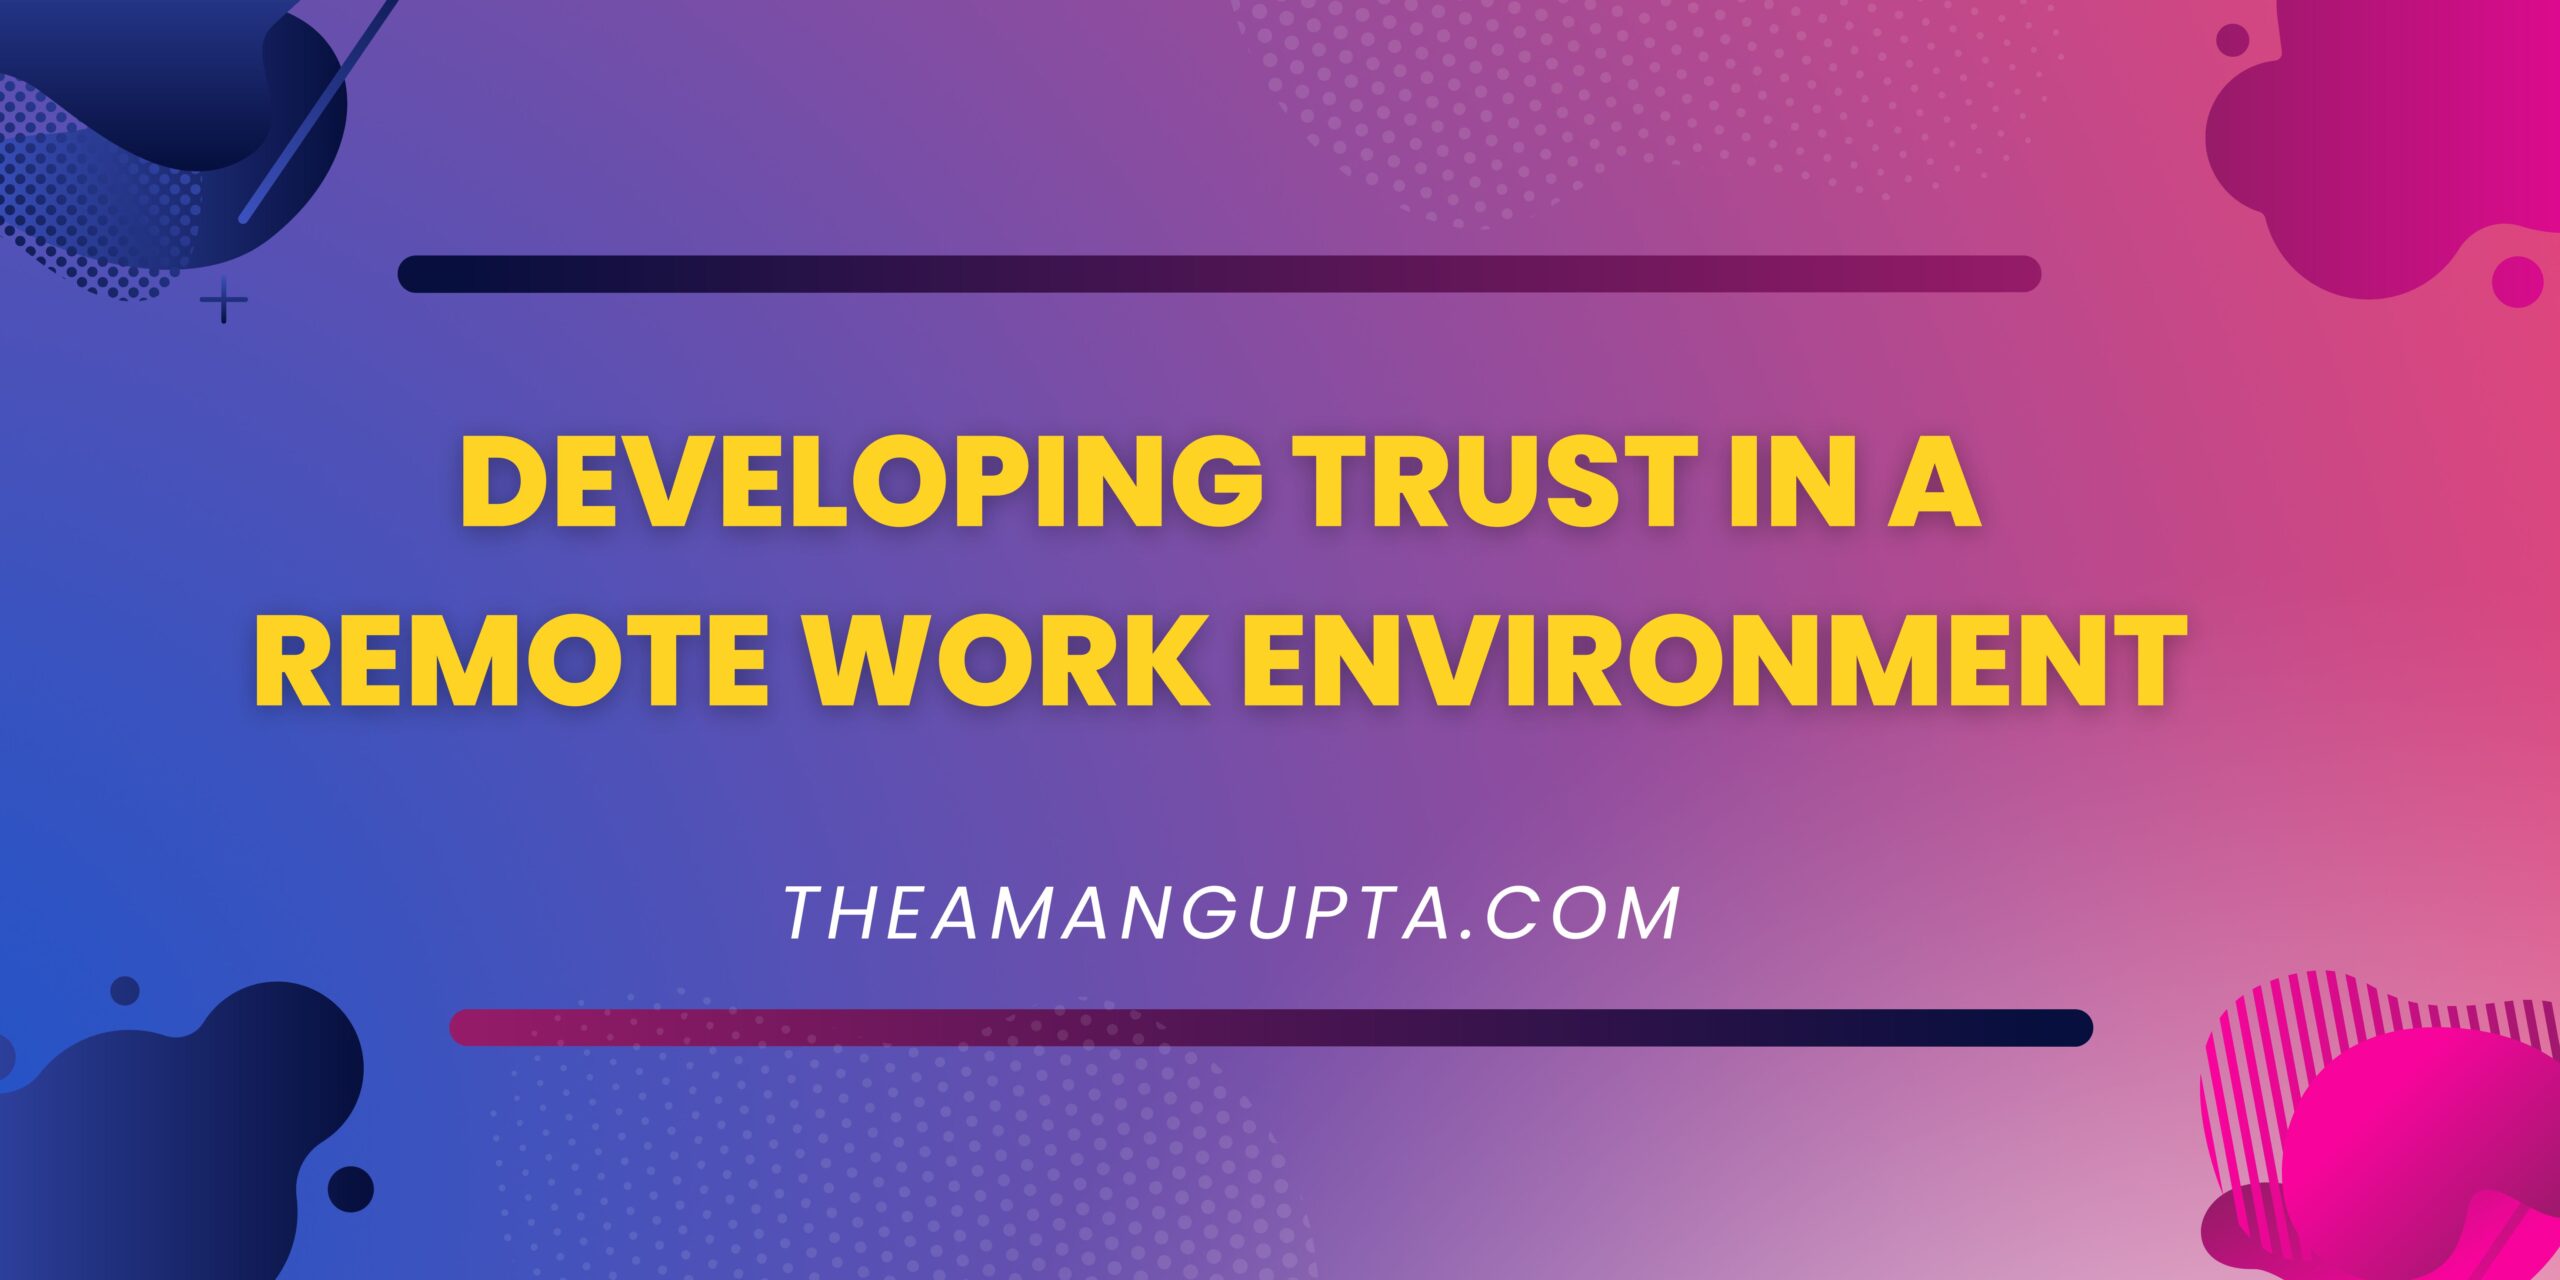 Developing Trust In A Remote Work Environment|Remote Work Environment|Theamangupta|Theamangupta